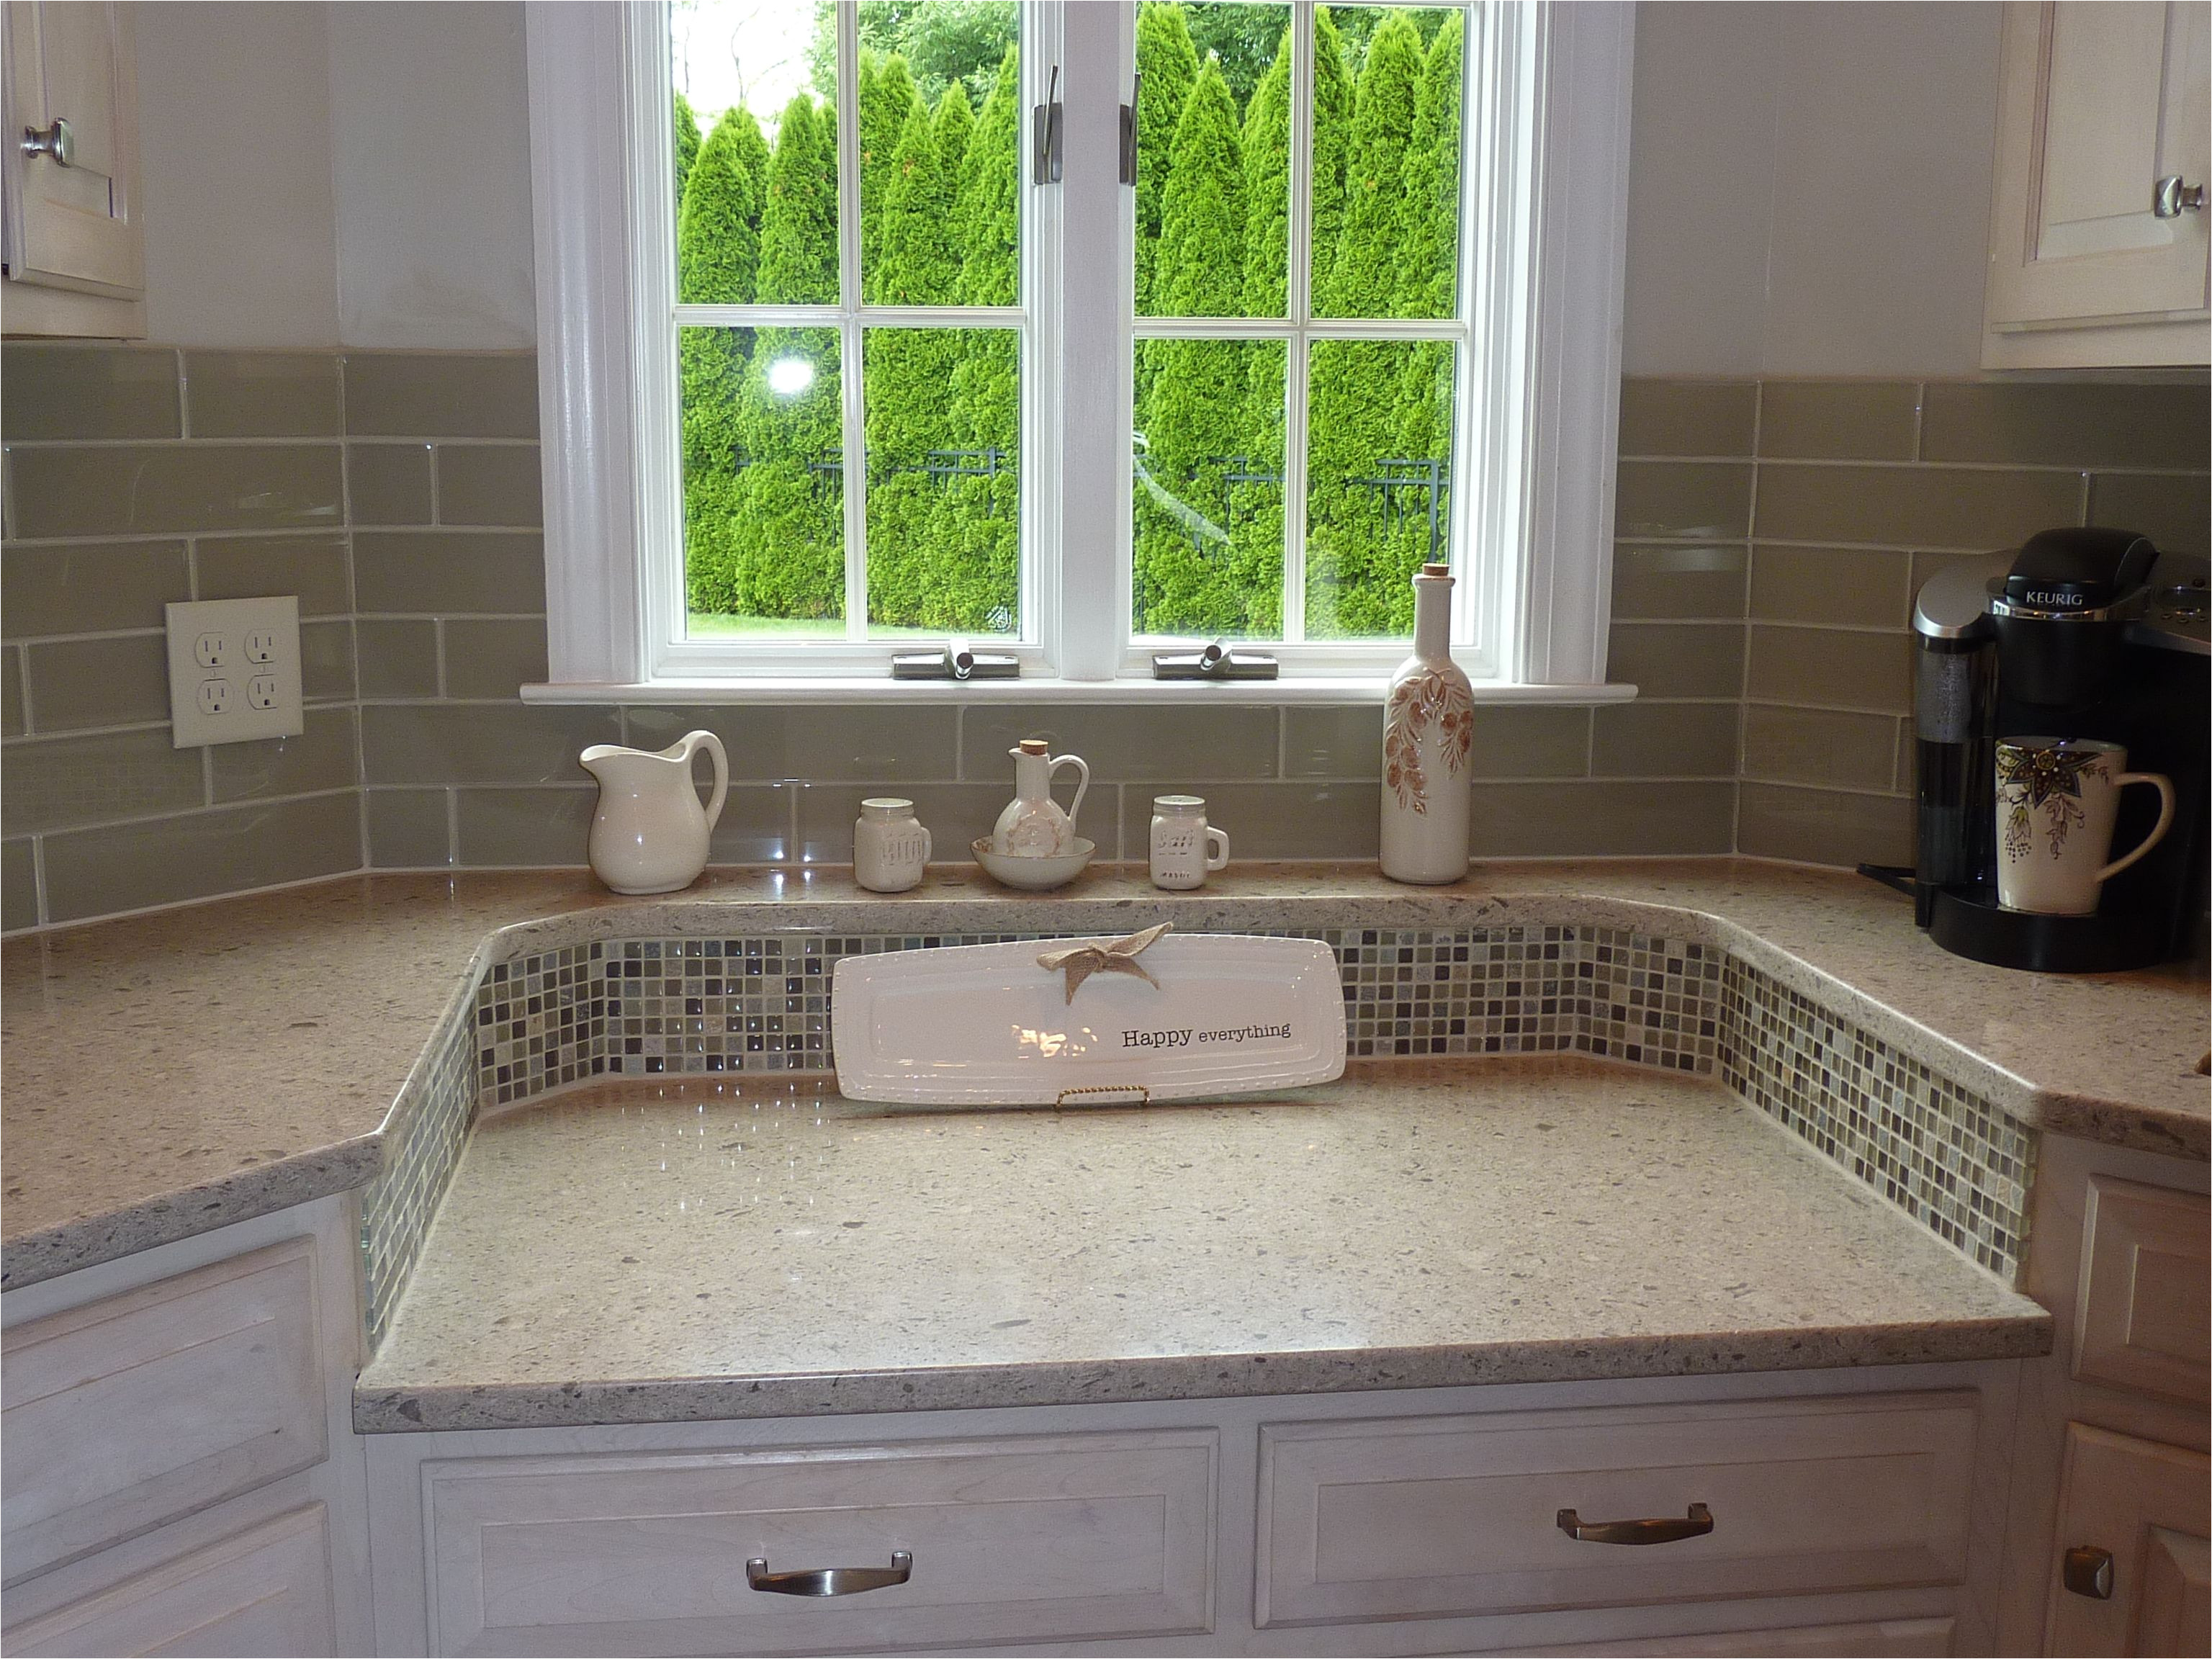 cambria darlington quartz counters bliss stone glass mosaics and bliss element earth glass subway tiles